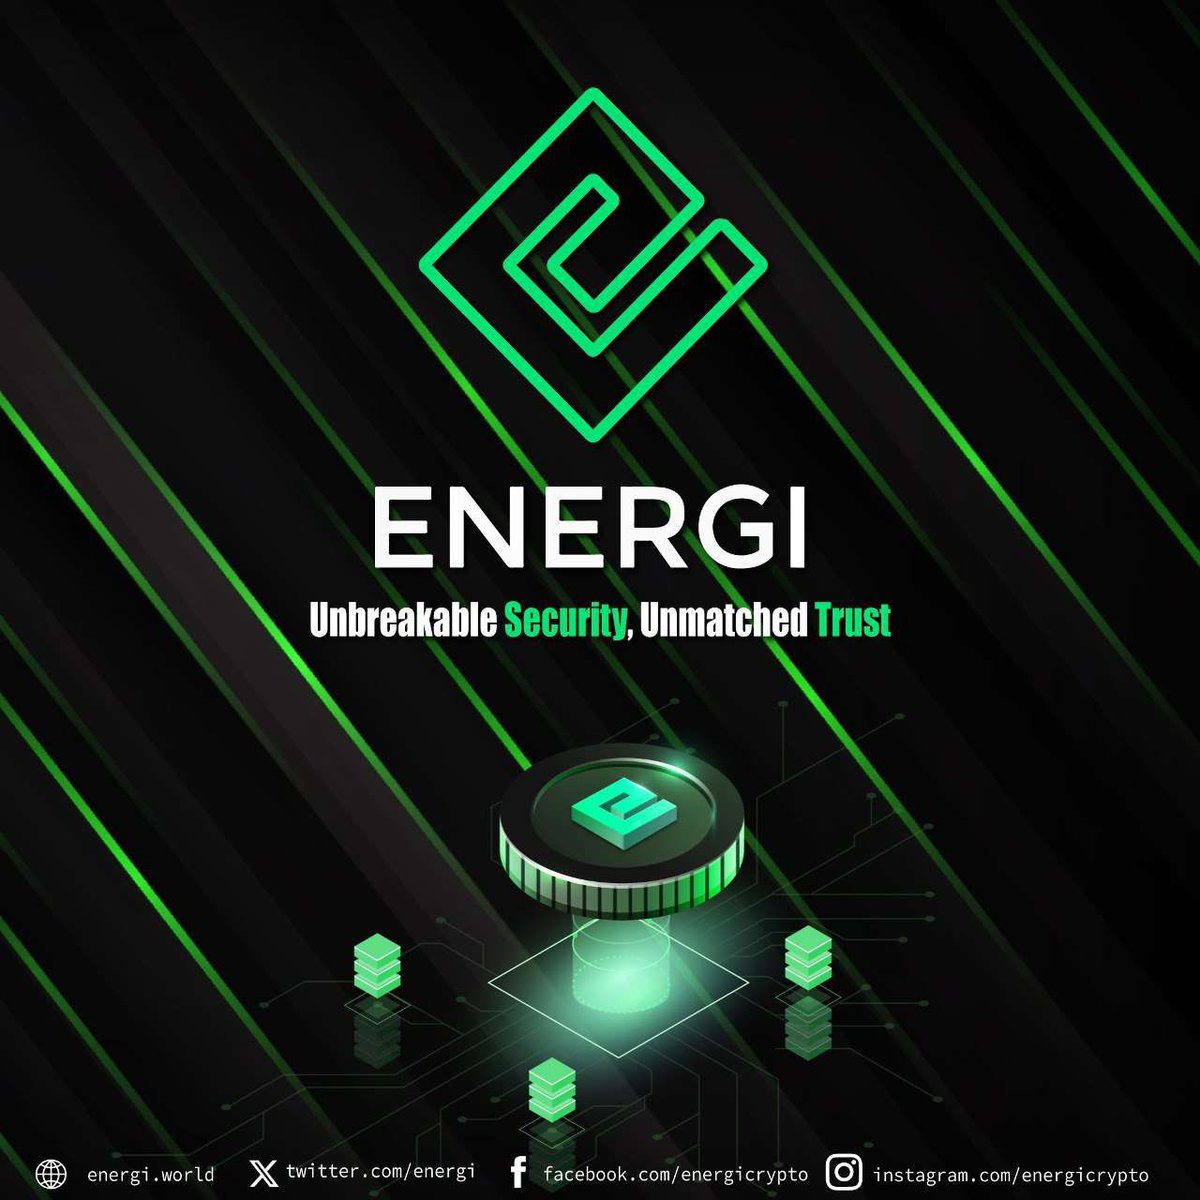 @BingXOfficial Good morning and don’t forget to add some $NRG to your portfolio. @energi